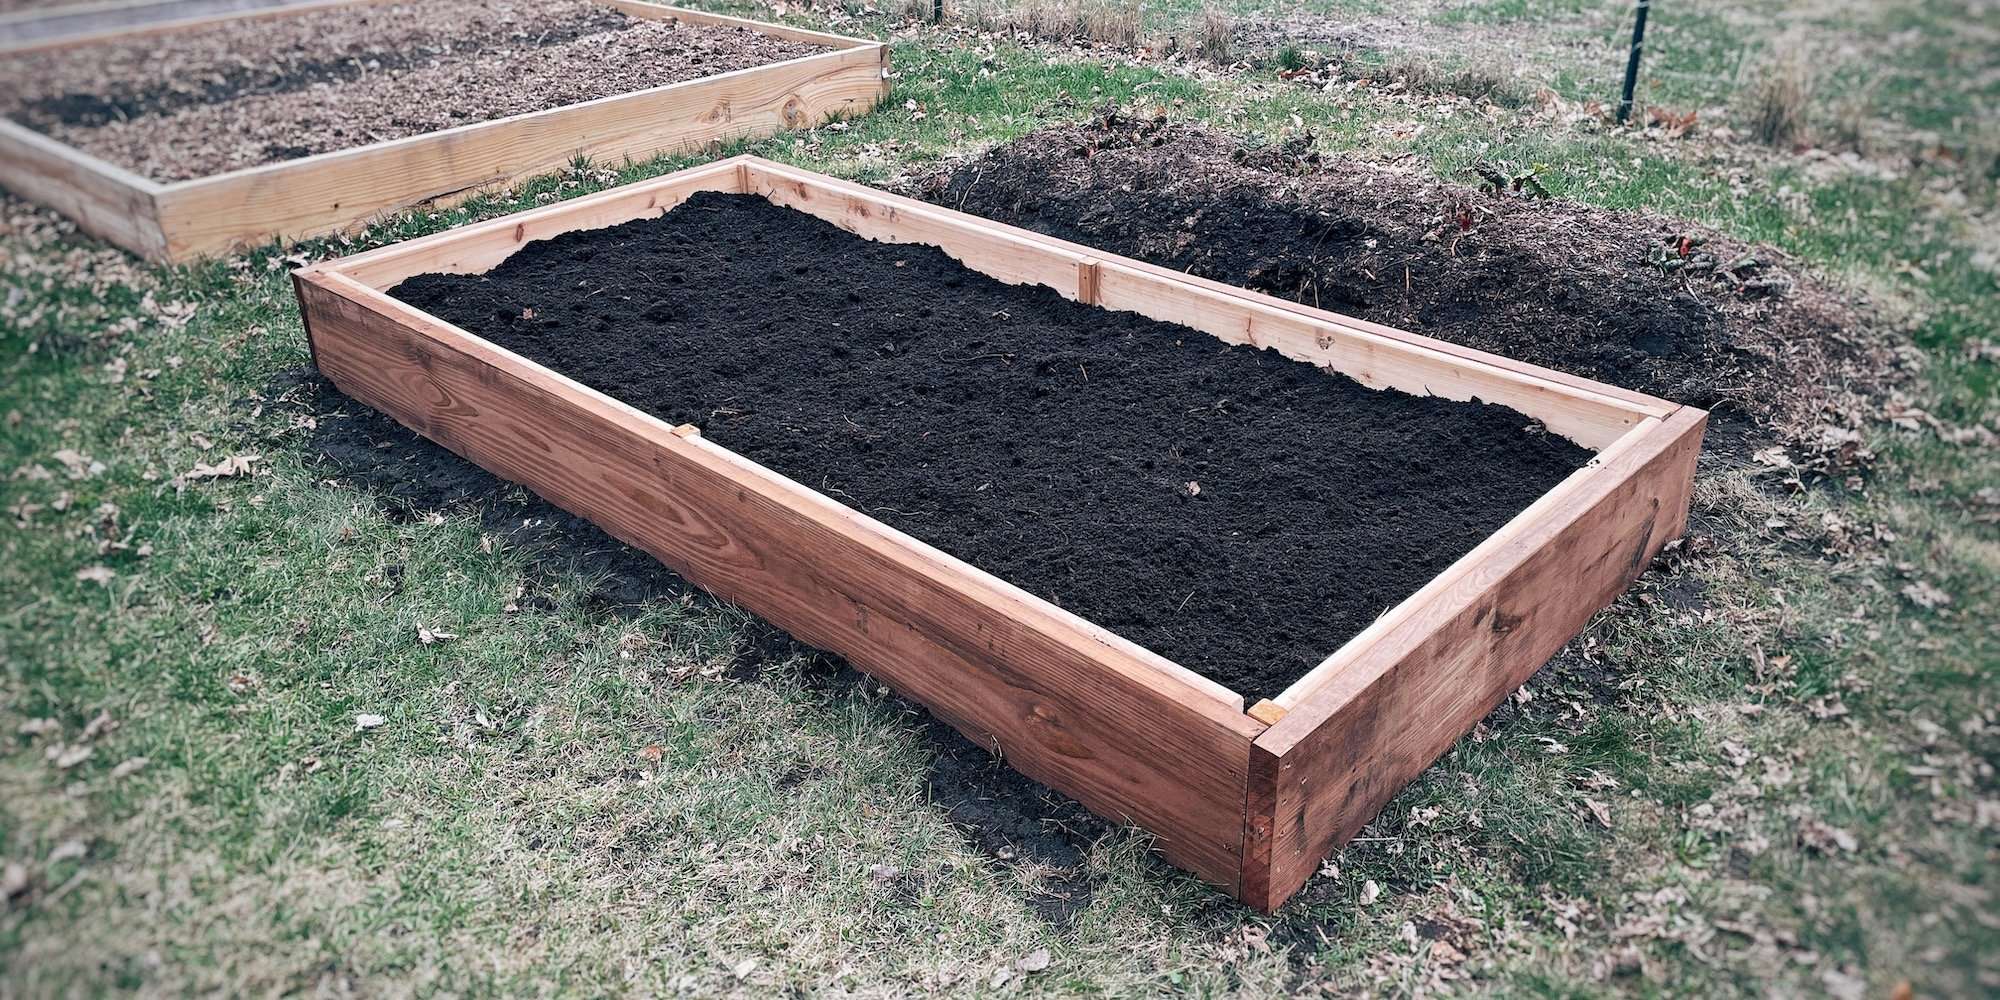 Completed Raised Bed filled with soil